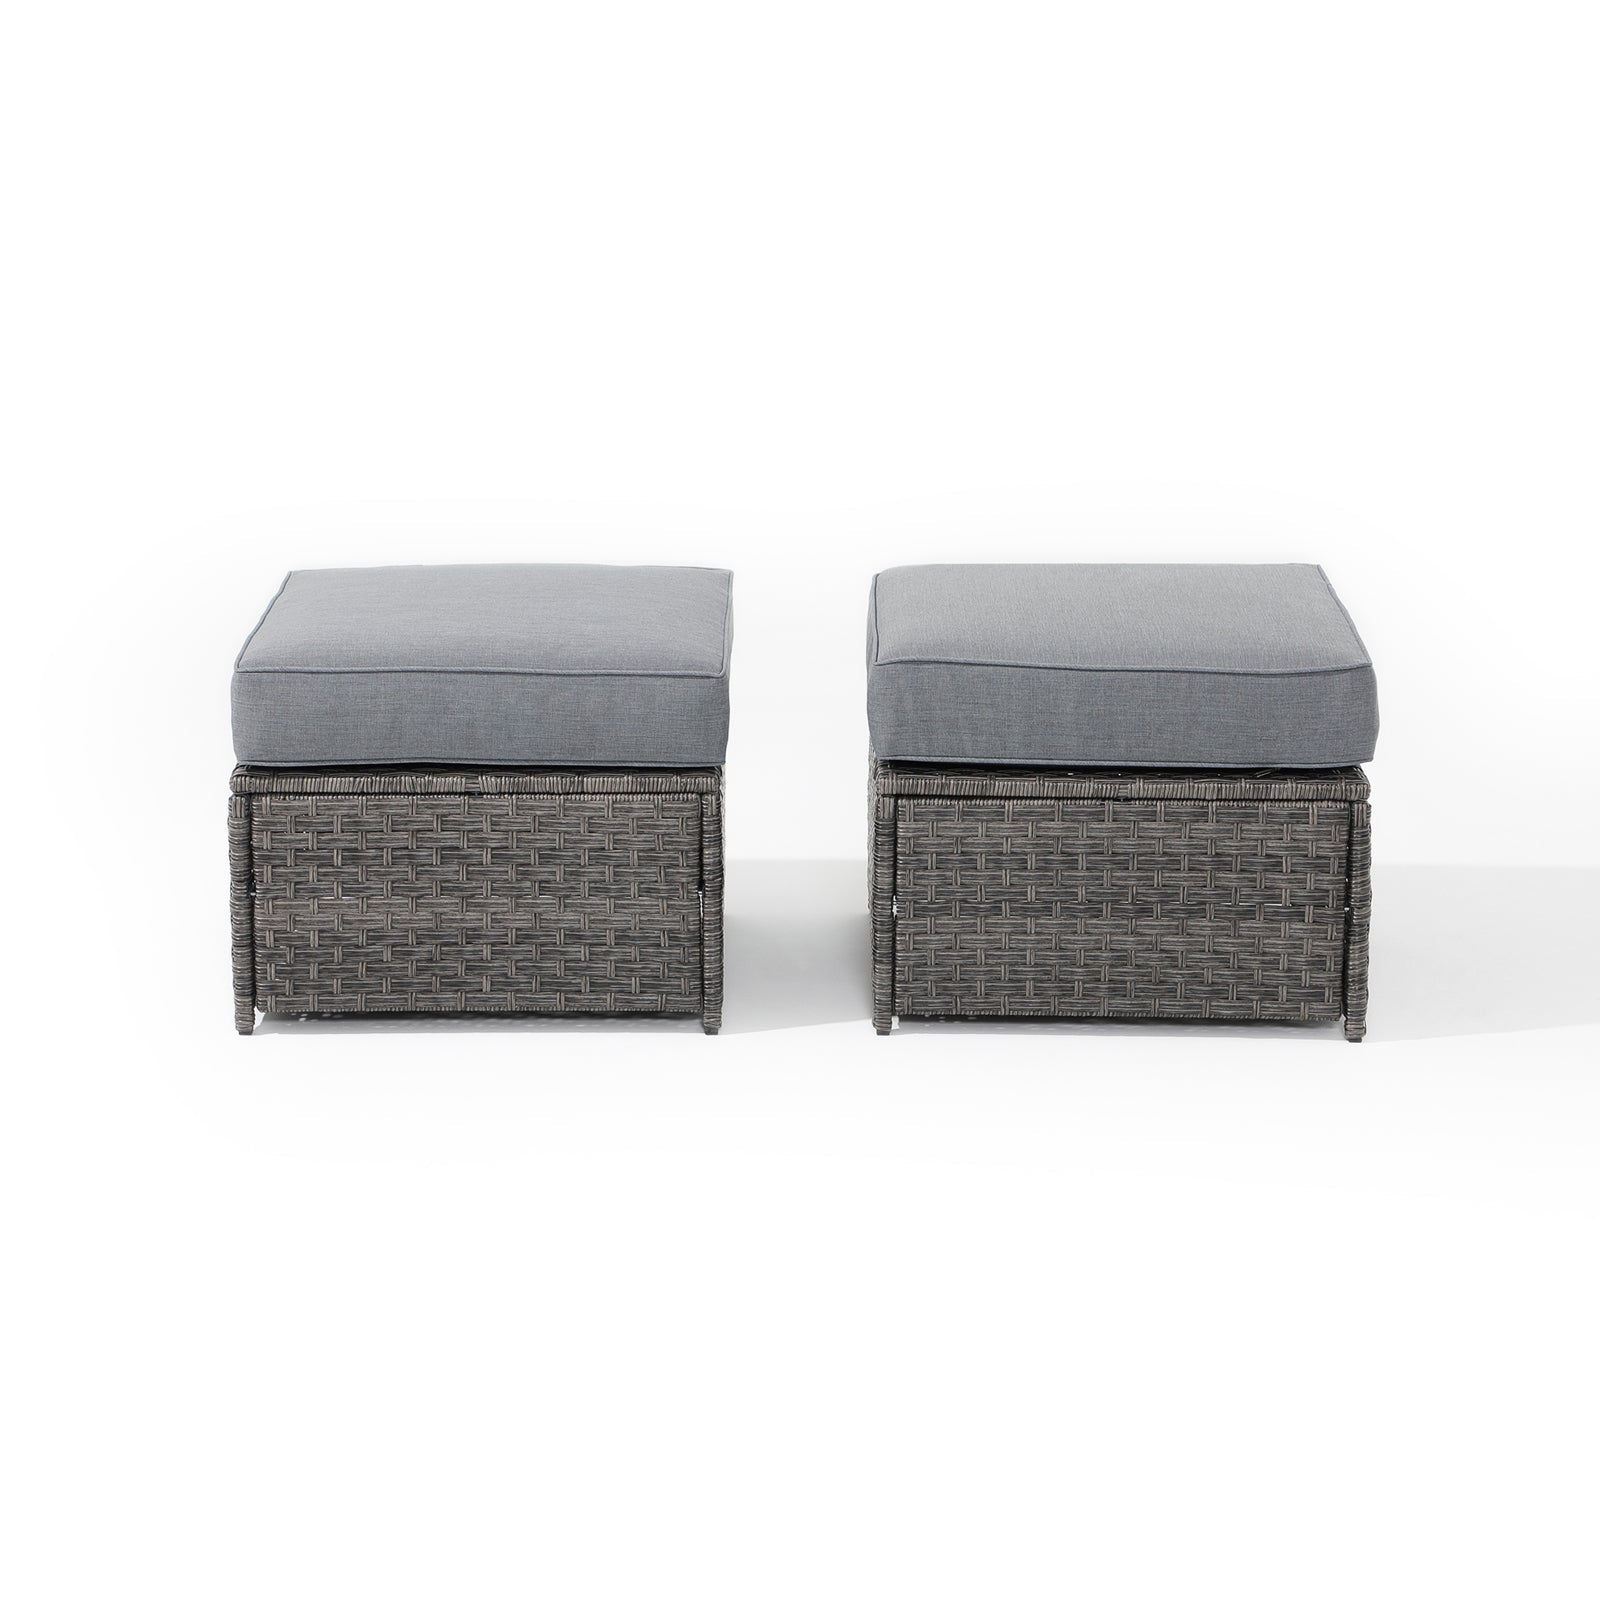 Ayia Modern HDPE Wicker Outdoor Furniture, 2-Piece grey wicker Ottomans and grey cushions, front - Jardina Furniture #color_Grey